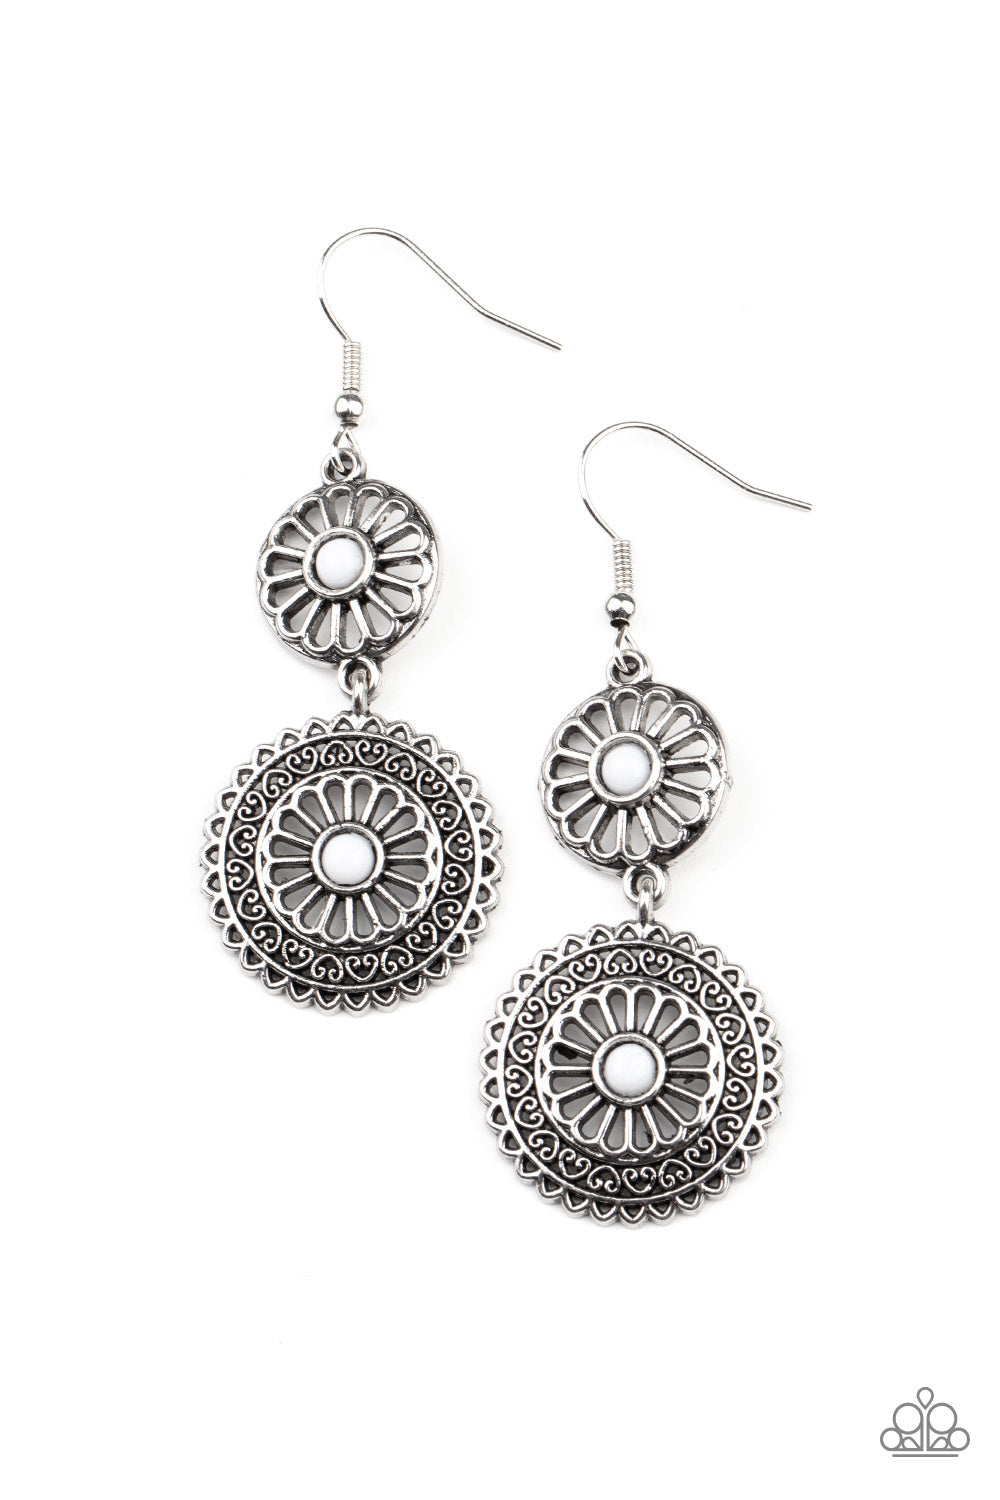 Keep It WHEEL - White and Silver Earrings - Paparazzi Accessories - Dainty white beads adorn the centers of floral patterned silver frames that link into a whimsical lure. Earring attaches to a standard fishhook fitting. Sold as one pair of earrings.